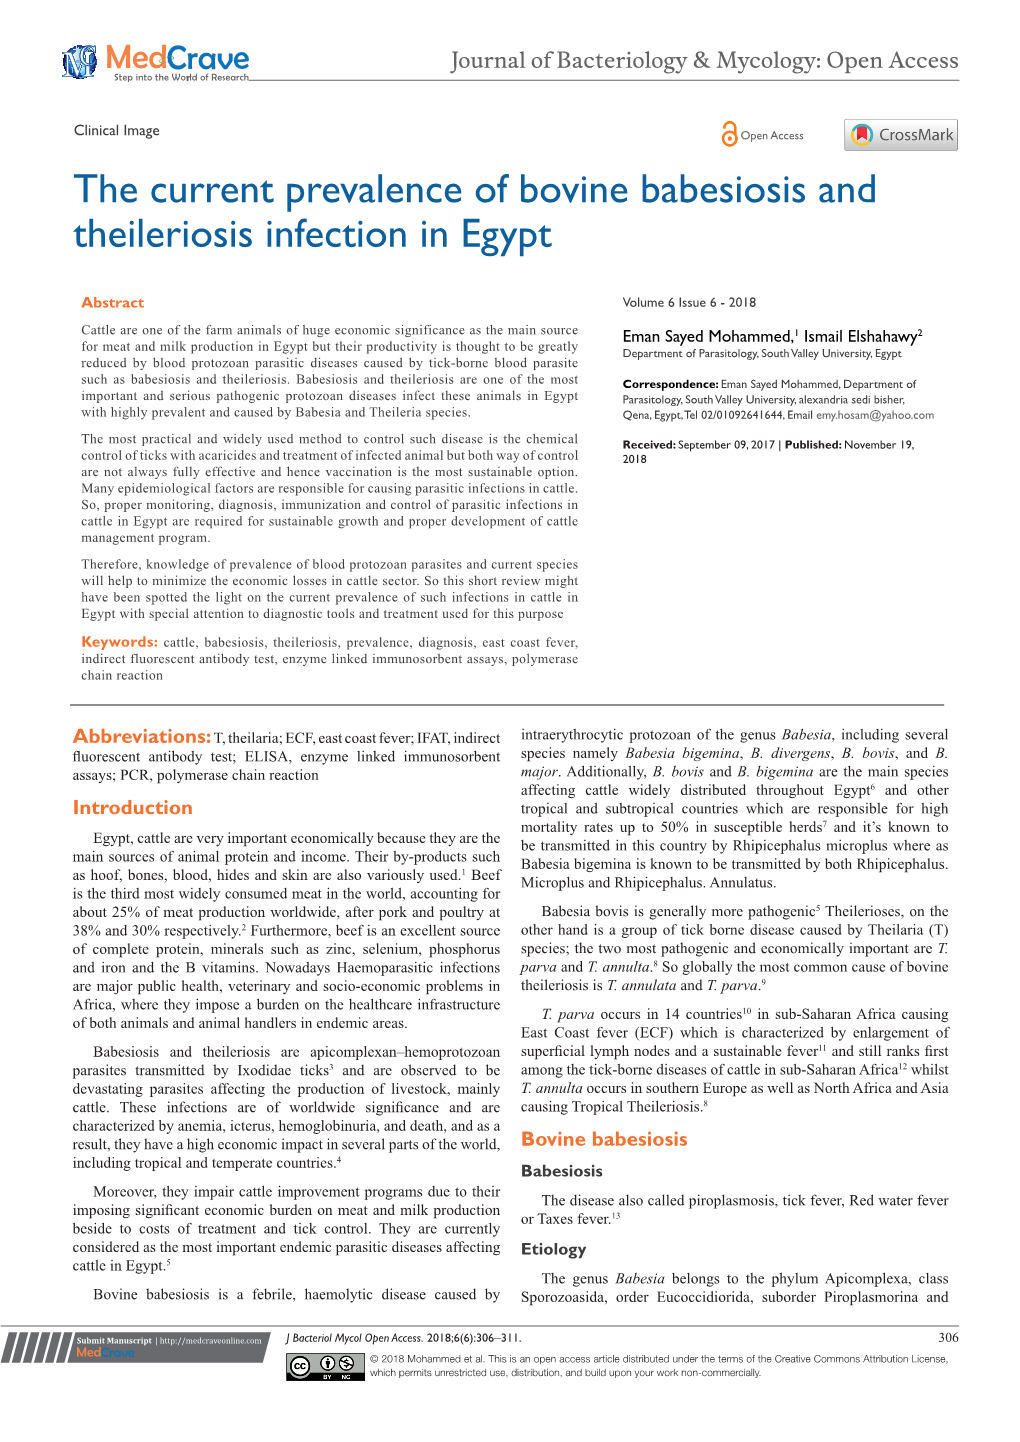 The Current Prevalence of Bovine Babesiosis and Theileriosis Infection in Egypt